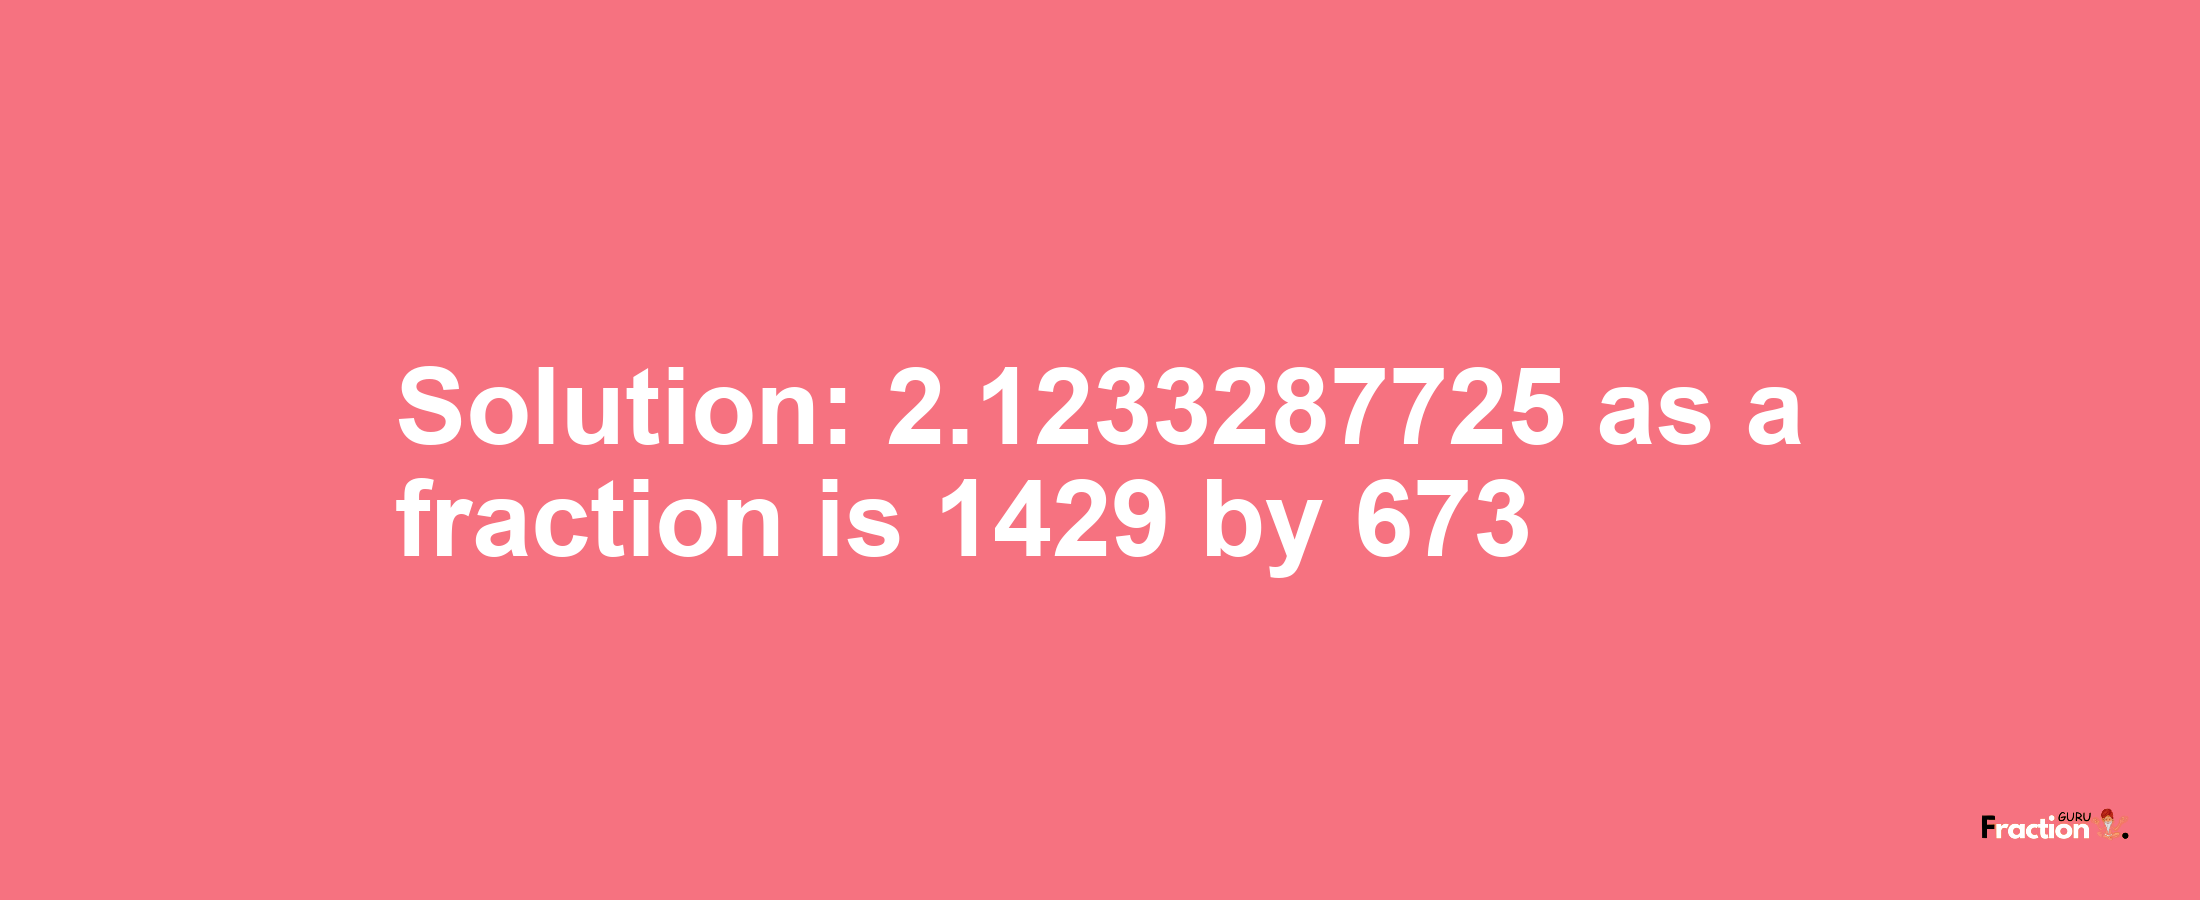 Solution:2.1233287725 as a fraction is 1429/673